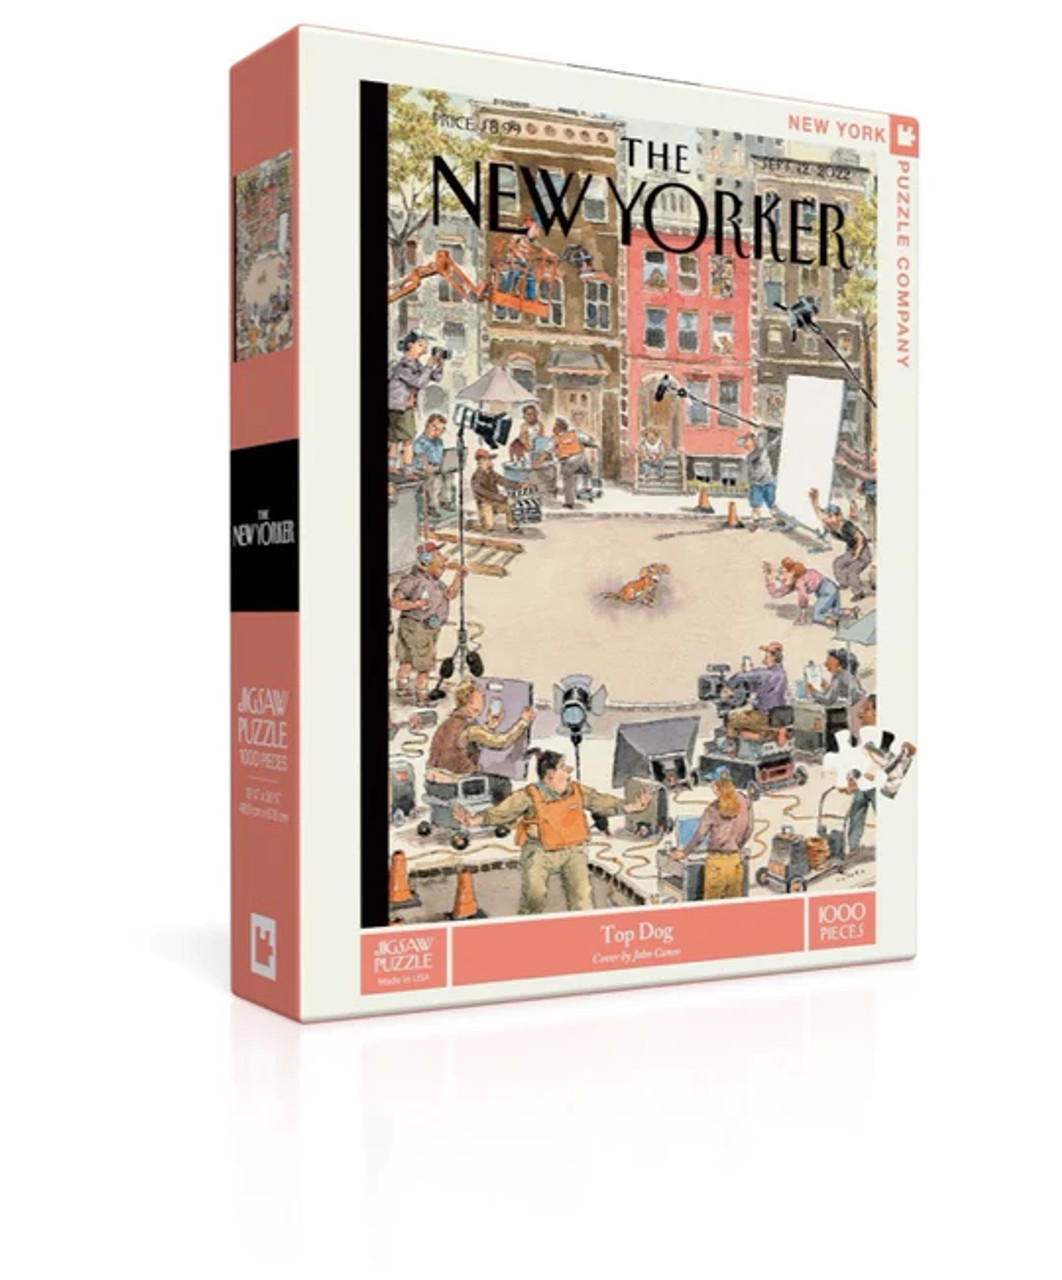 TOP DOG - 1000 PIECE - NEW YORKER